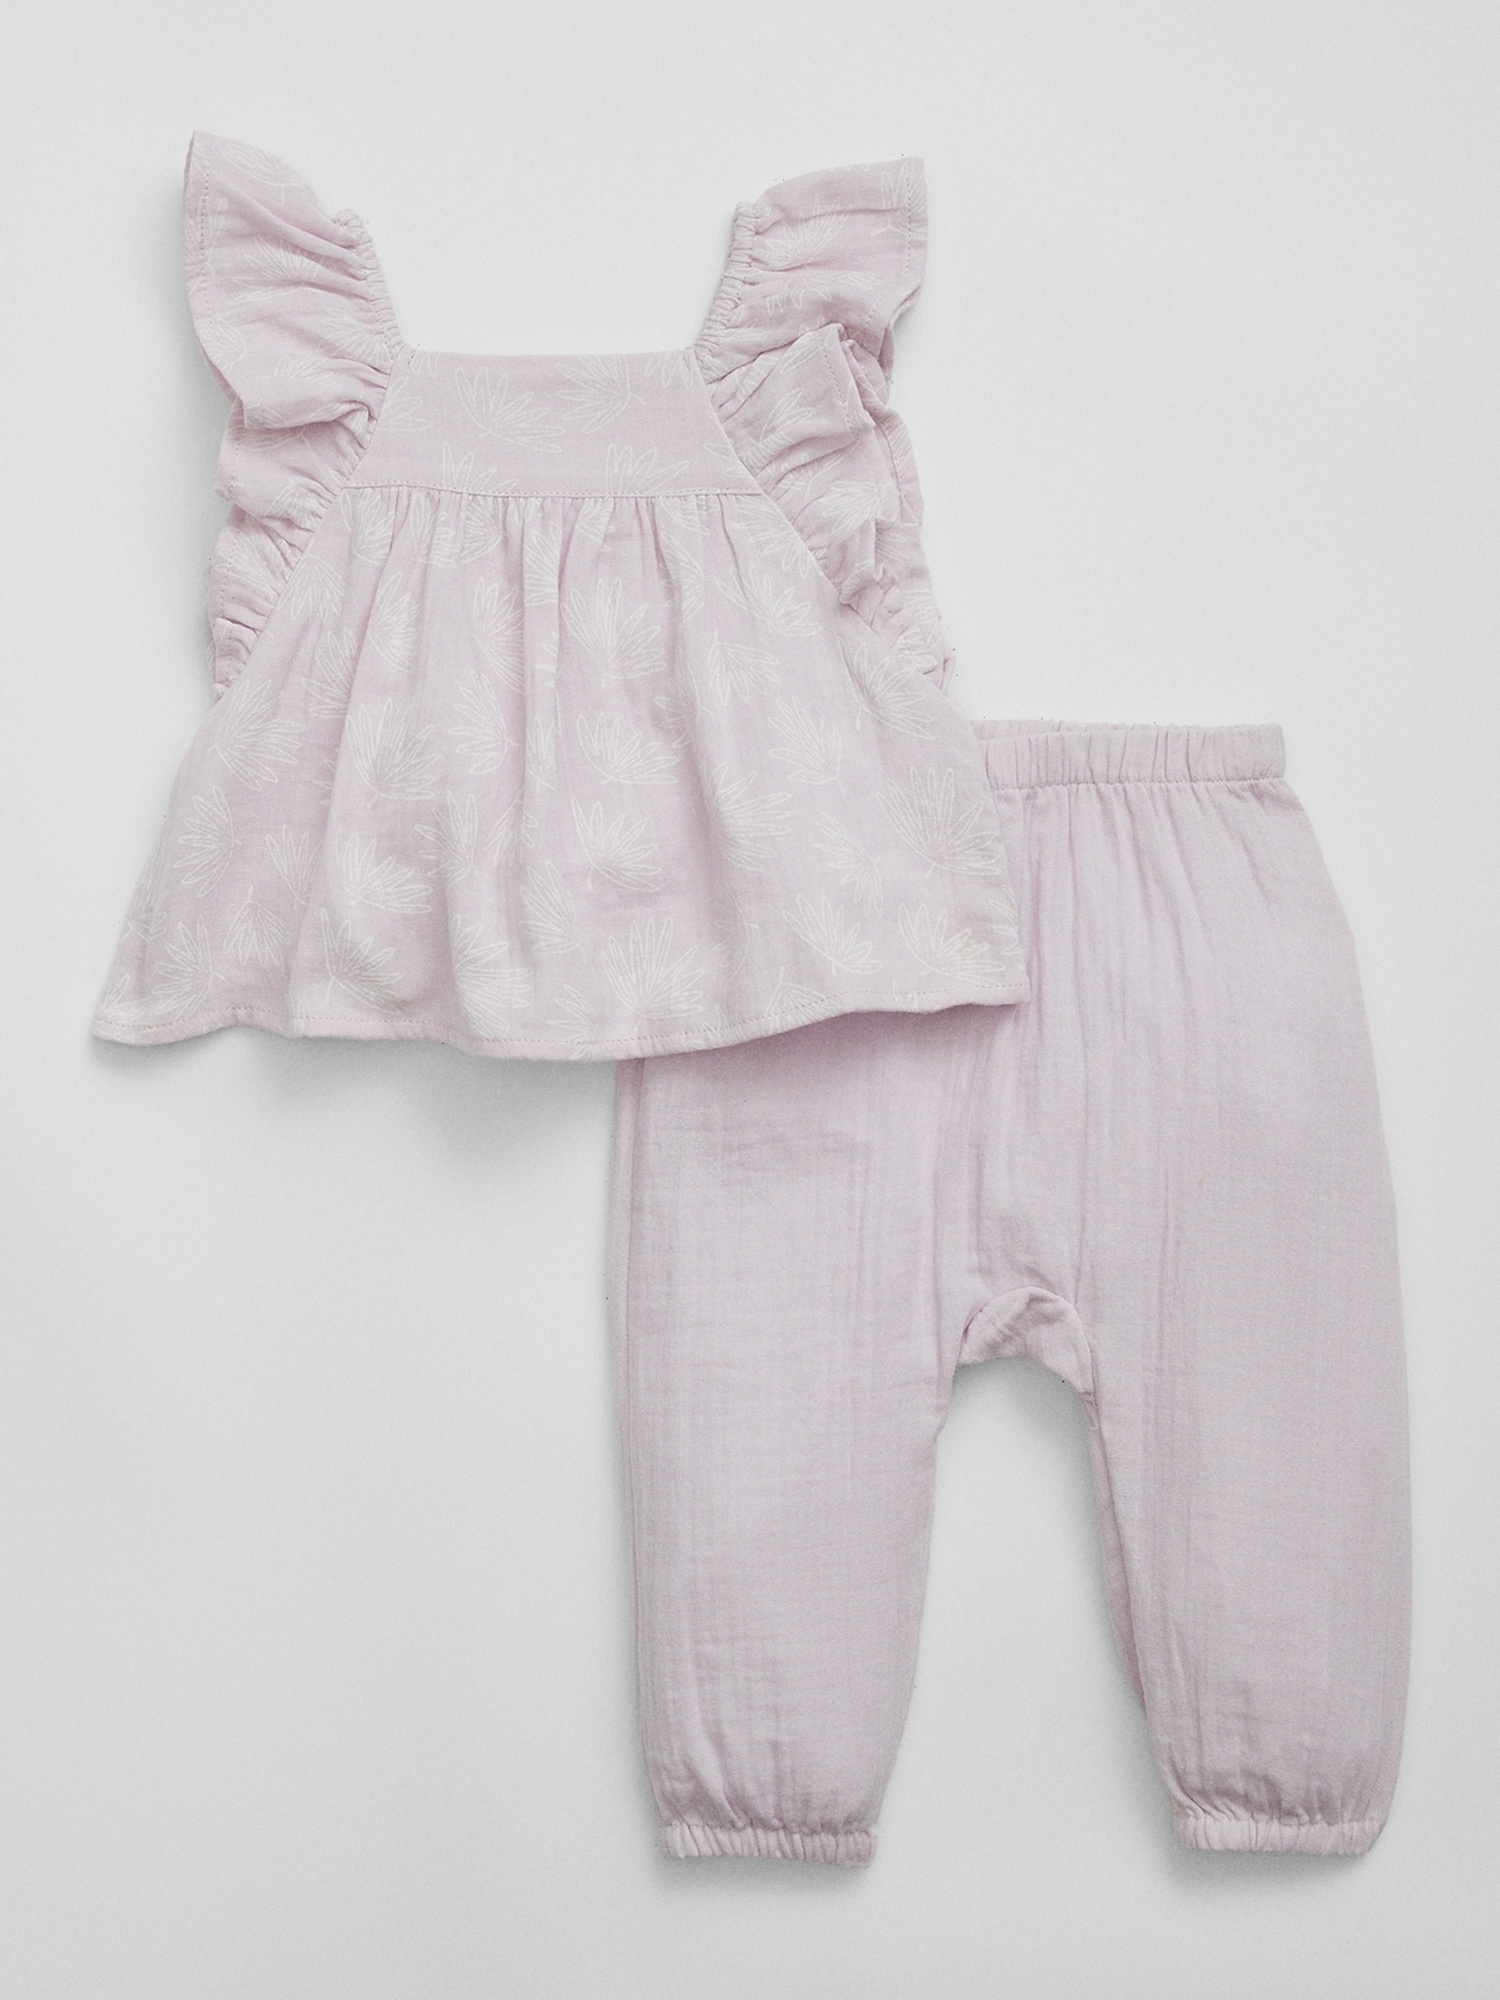 Baby Gauze Flutter Two-Piece Outfit Set